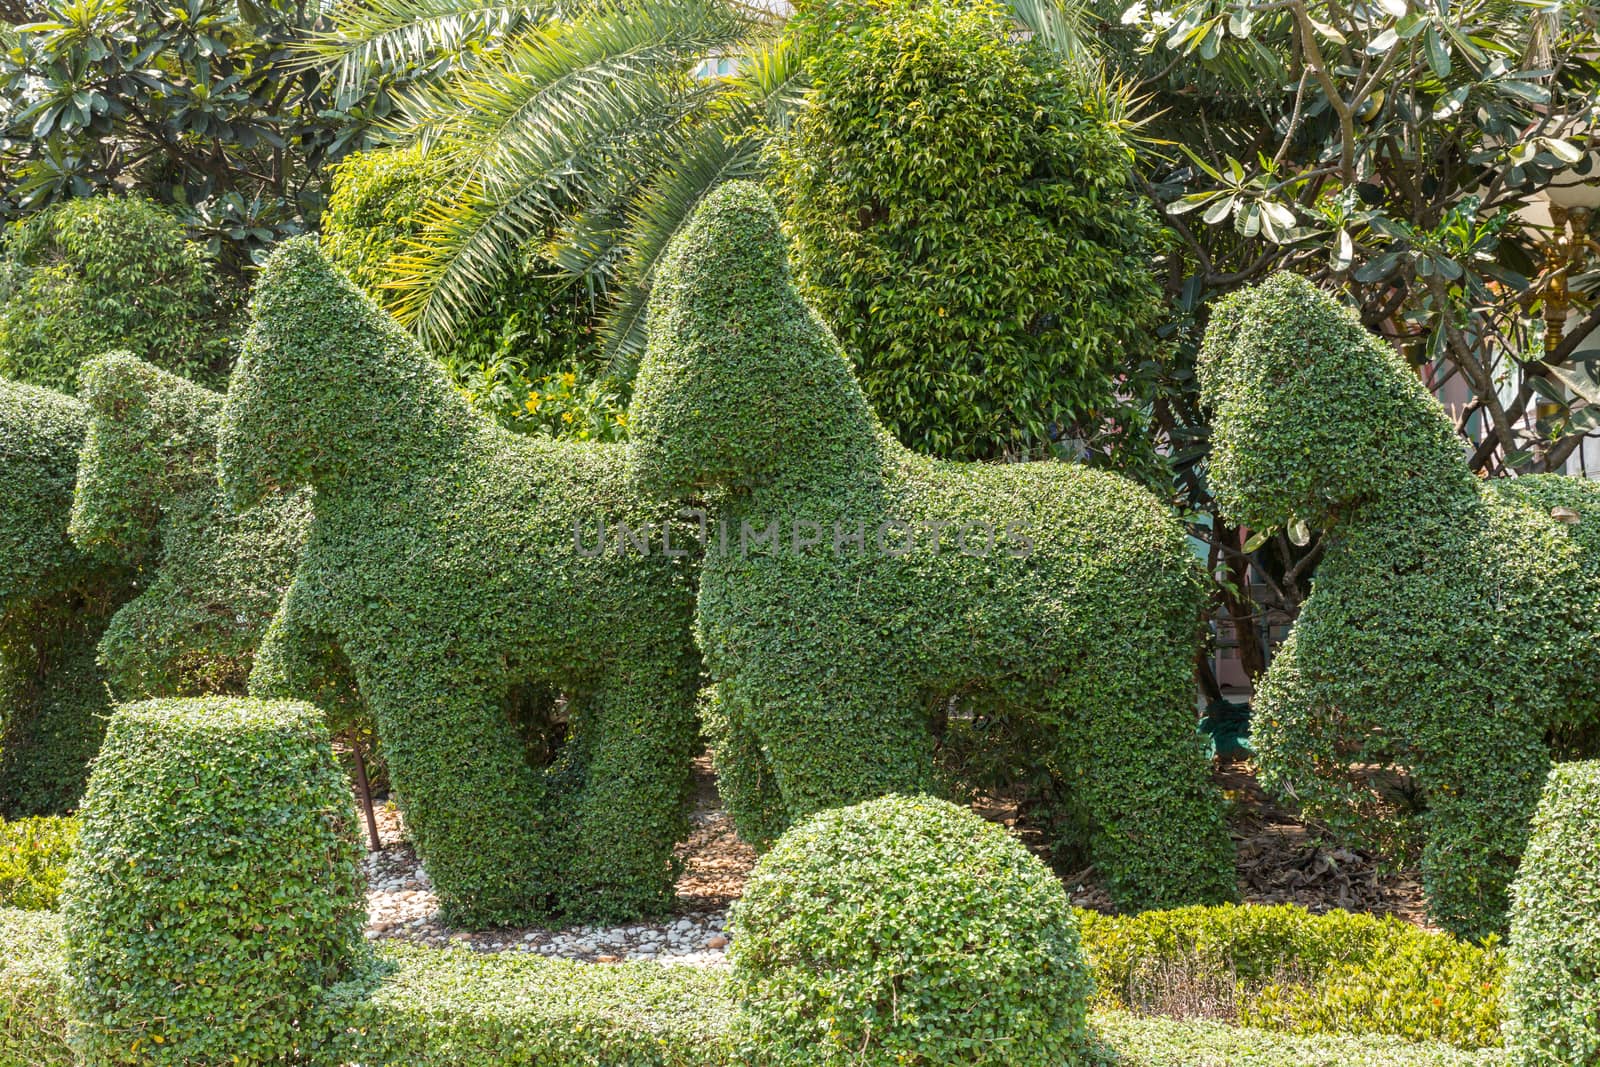 animals carved from bushes by Mieszko9